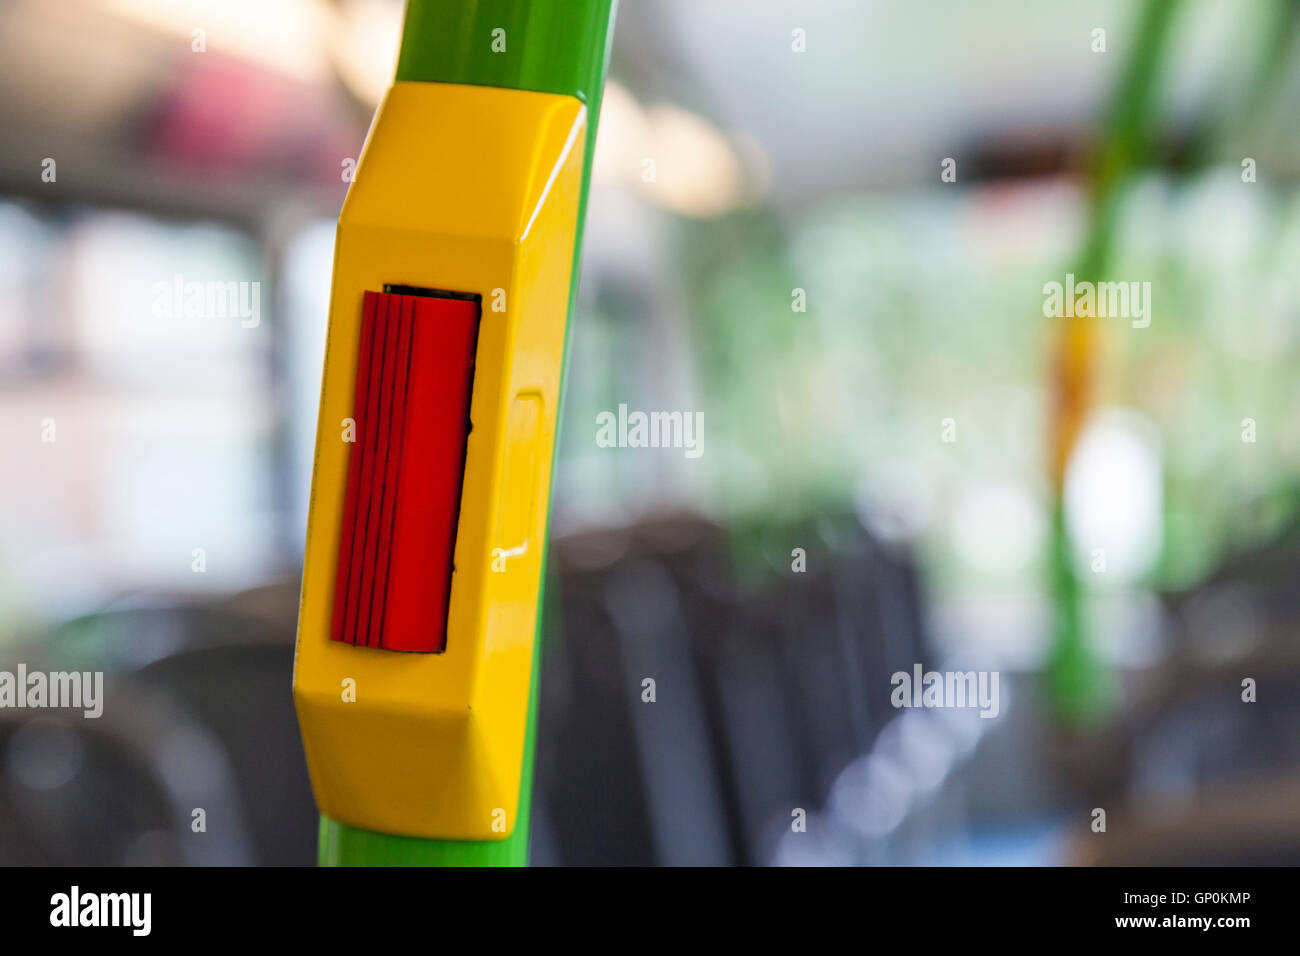 Bell press or bell push on a bus, England, UK Stock Photo